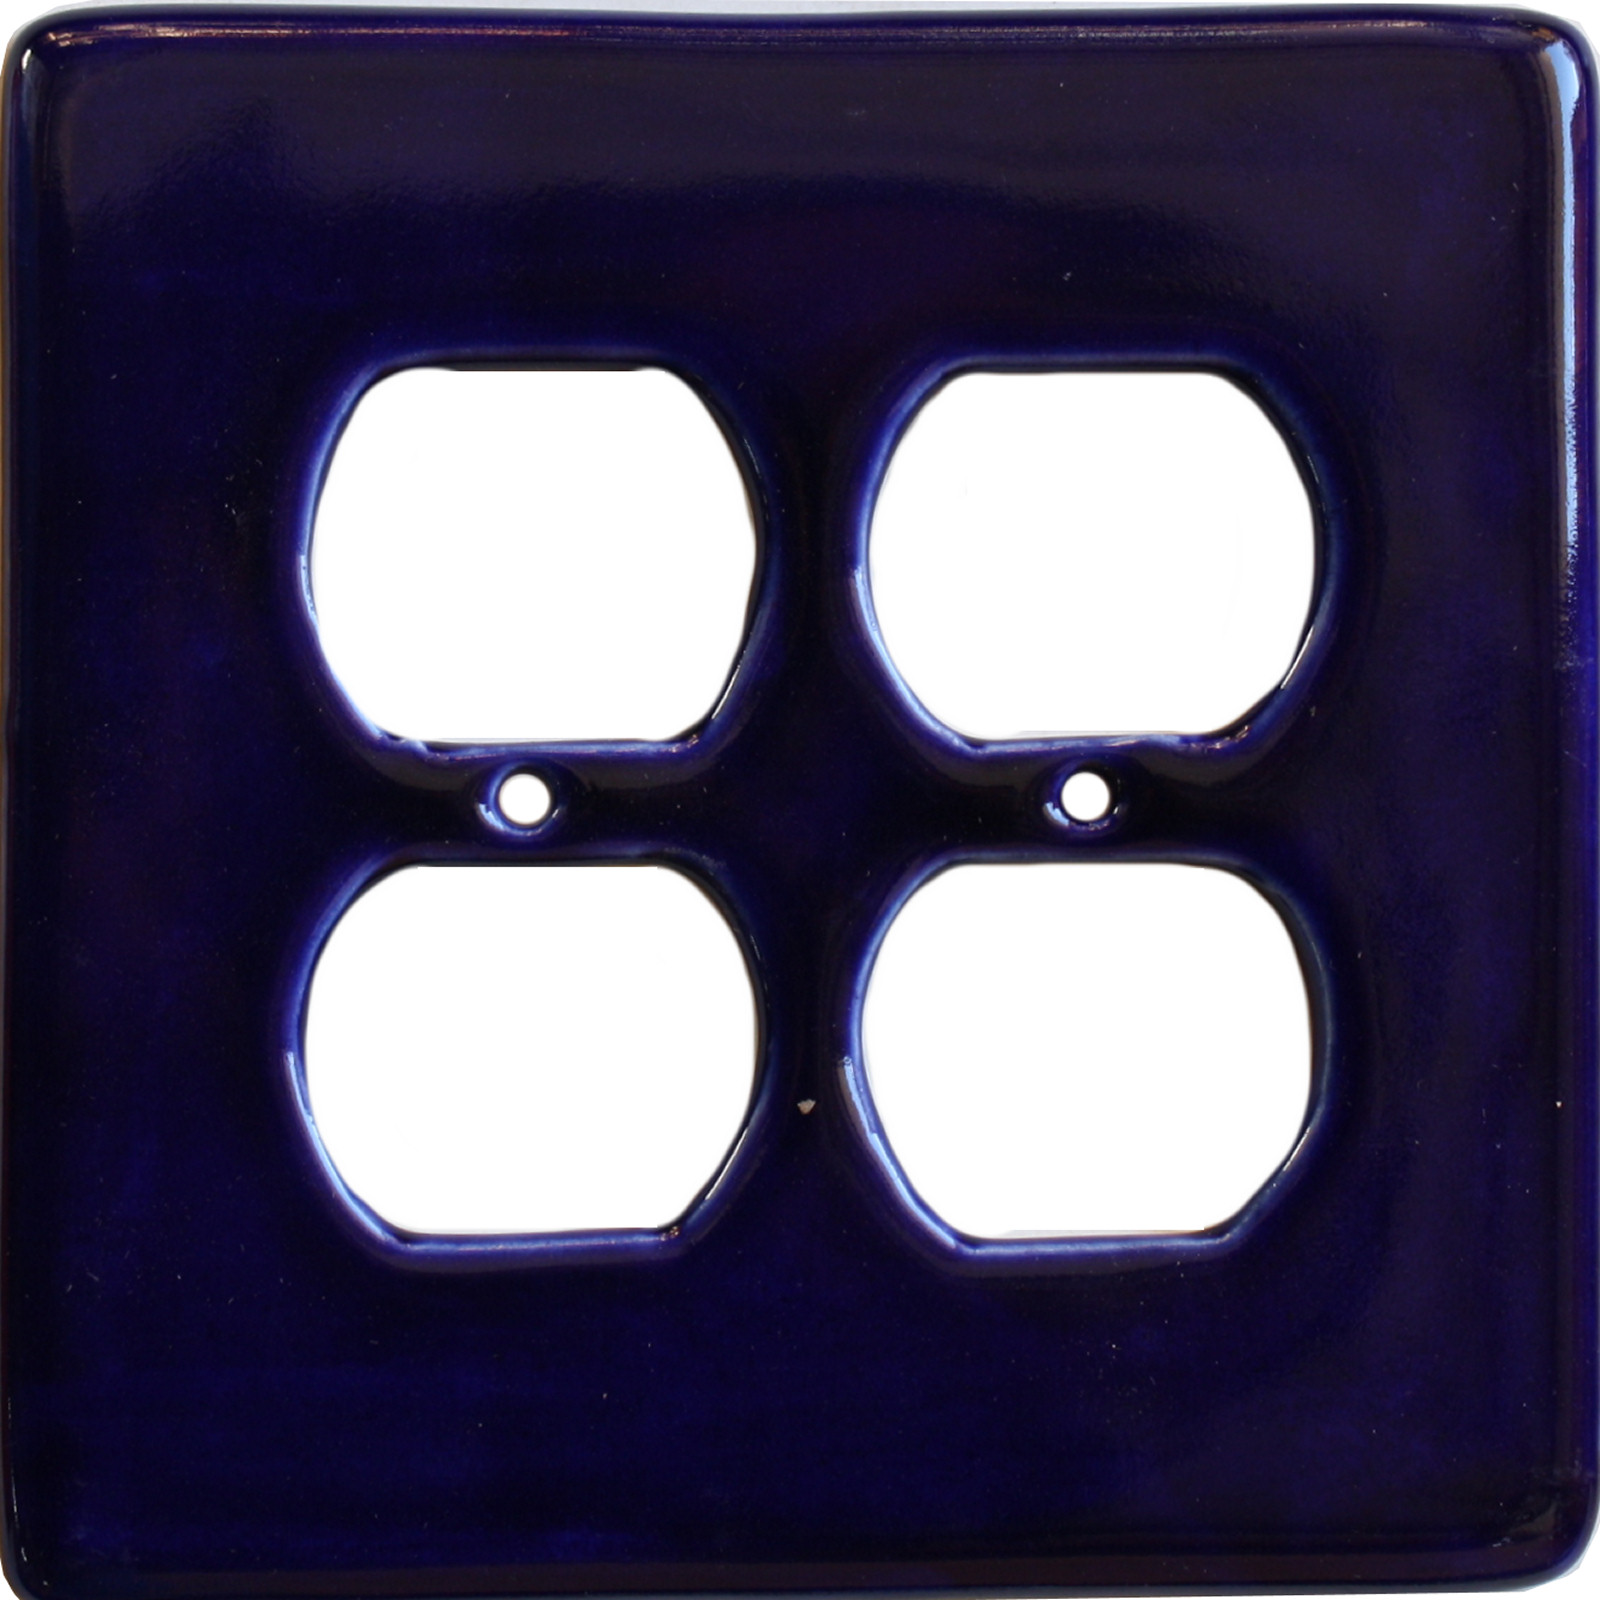 TalaMex Cobalt Blue Double Outlet Mexican Talavera Ceramic Switch Plate